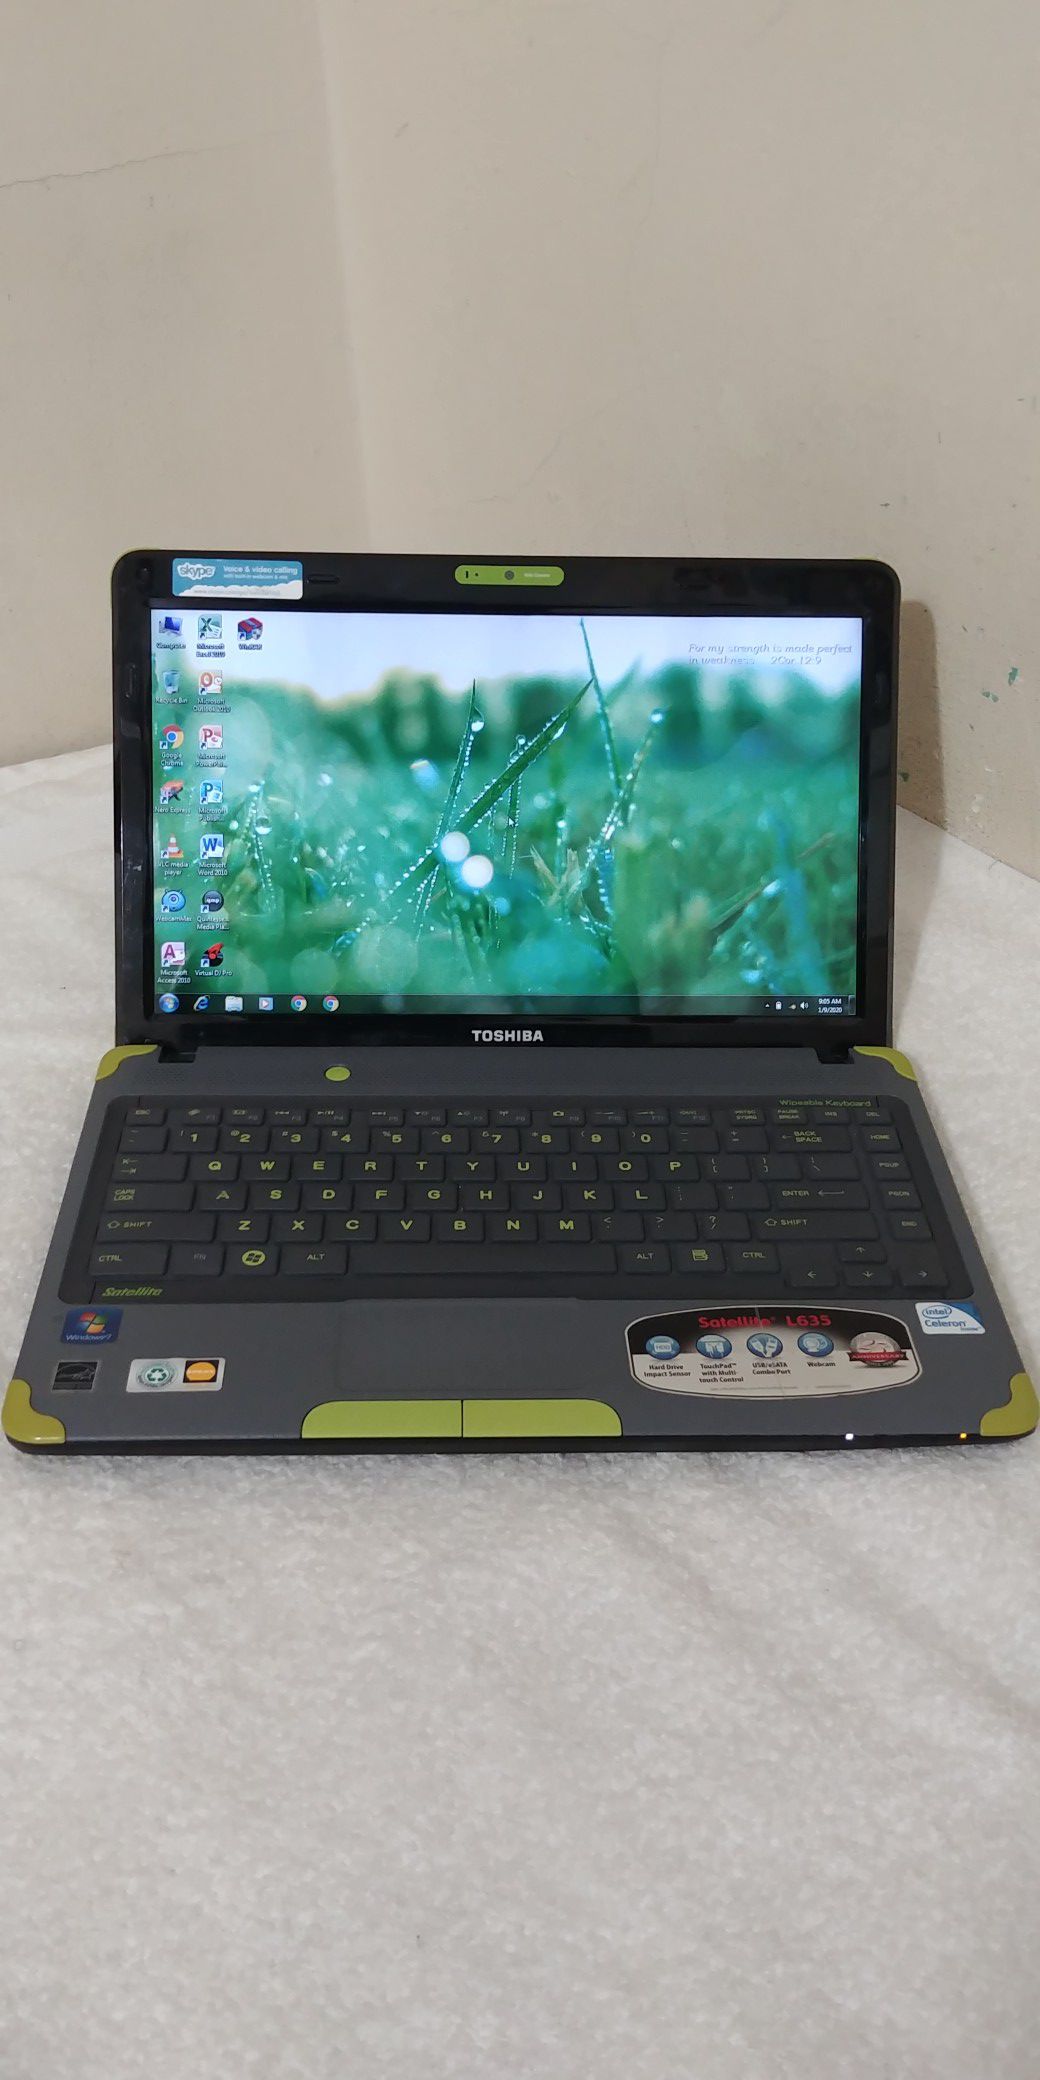 13.3" Toshiba Laptop, 4GB RAM, 320GB HDD, eSATA, WebCam, DVD RW. It's Small, Simple And Easy To Carry. Nice And Clean.